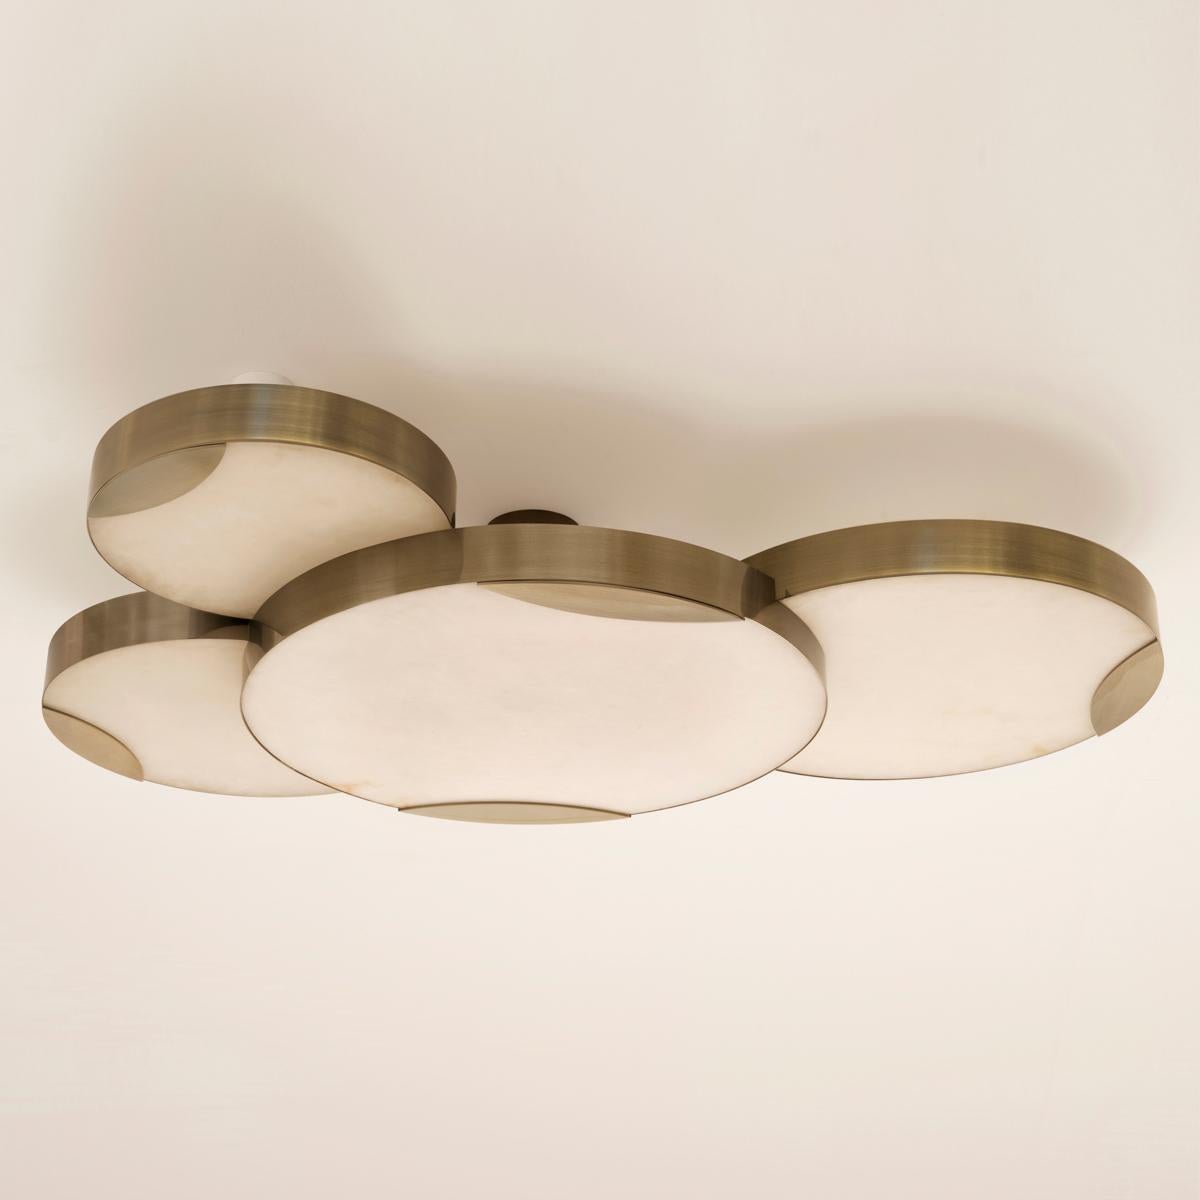 Italian Cloud N.4 Ceiling Light by Gaspare Asaro-Bronze Finish For Sale